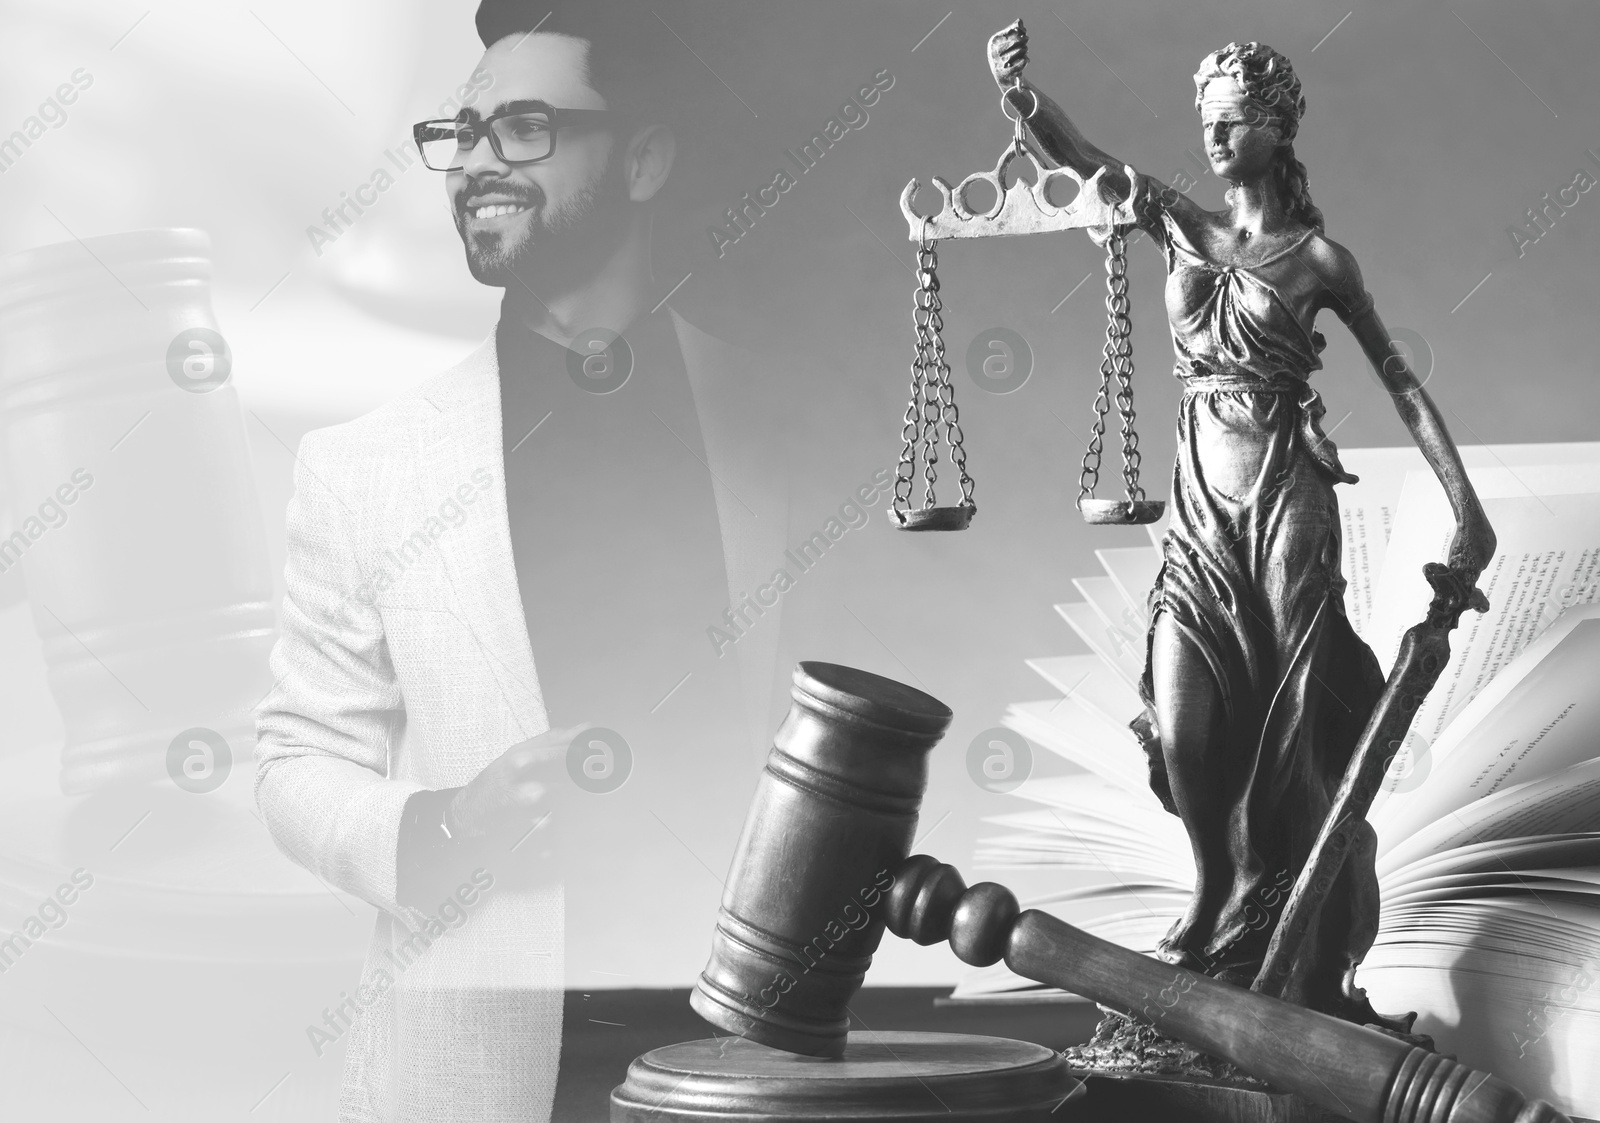 Image of Double exposure of lawyer and Lady Justice figure with gavel